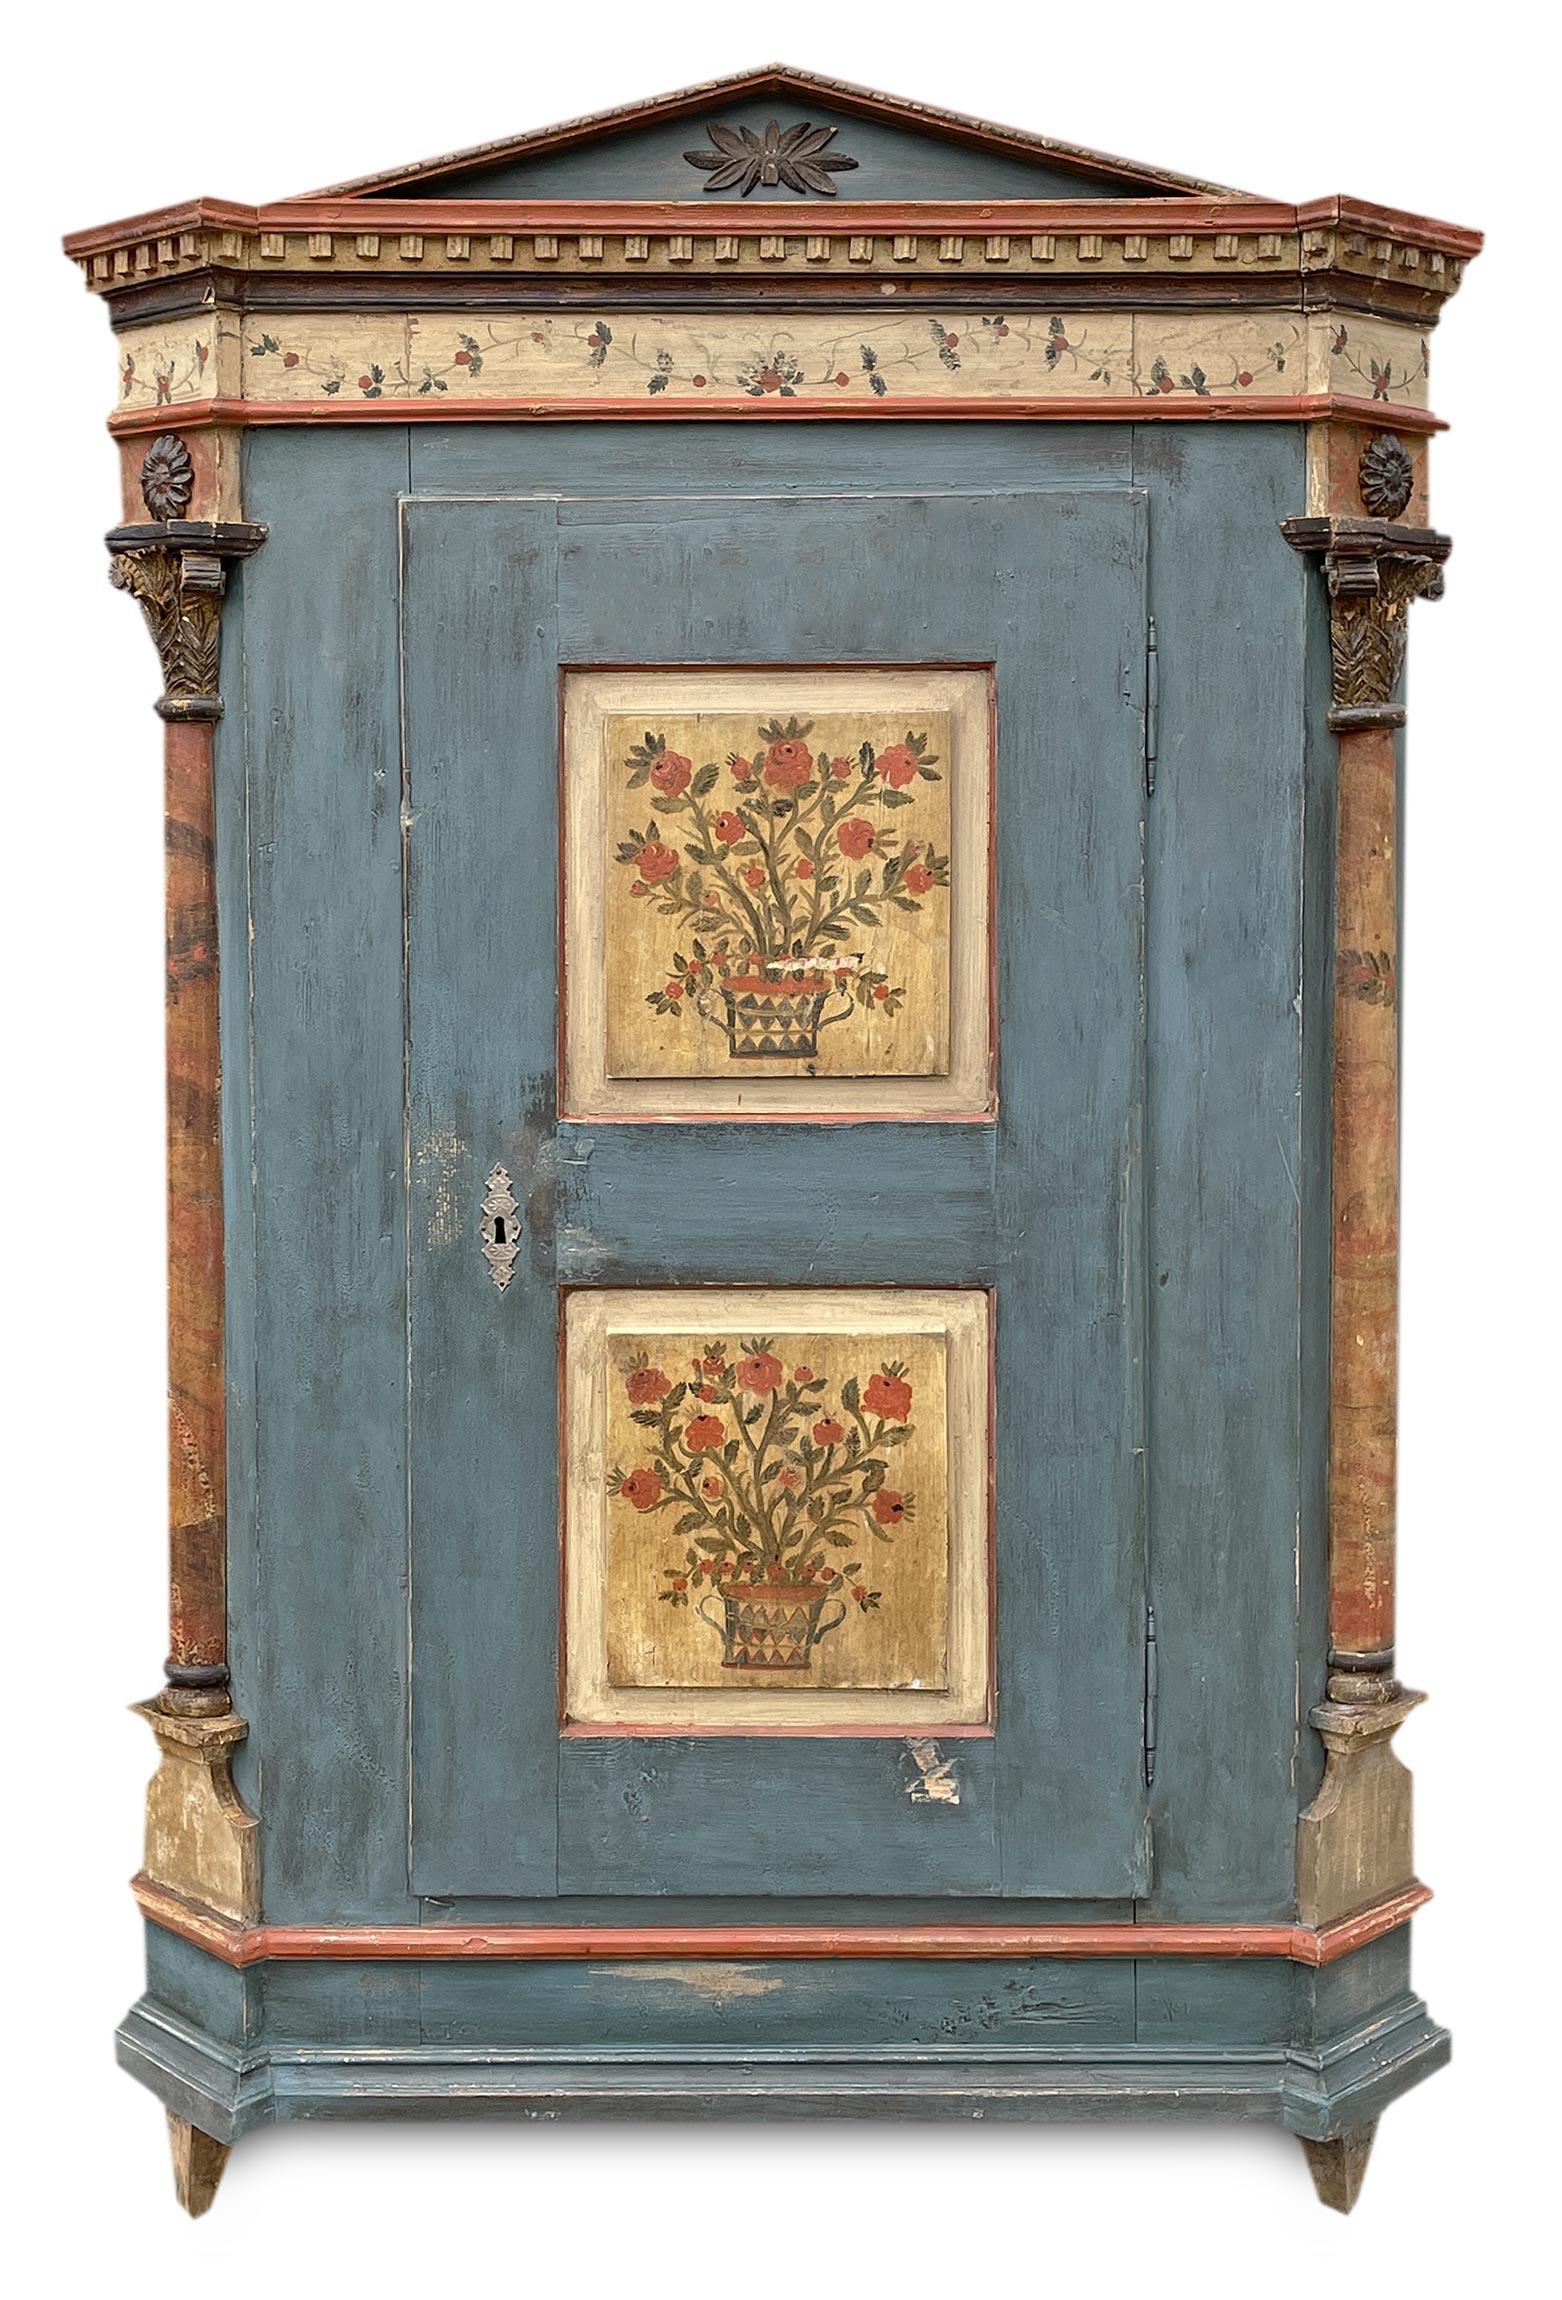 Fir Early 19th Century Blu Floral Painted Cabinet with Tympanum